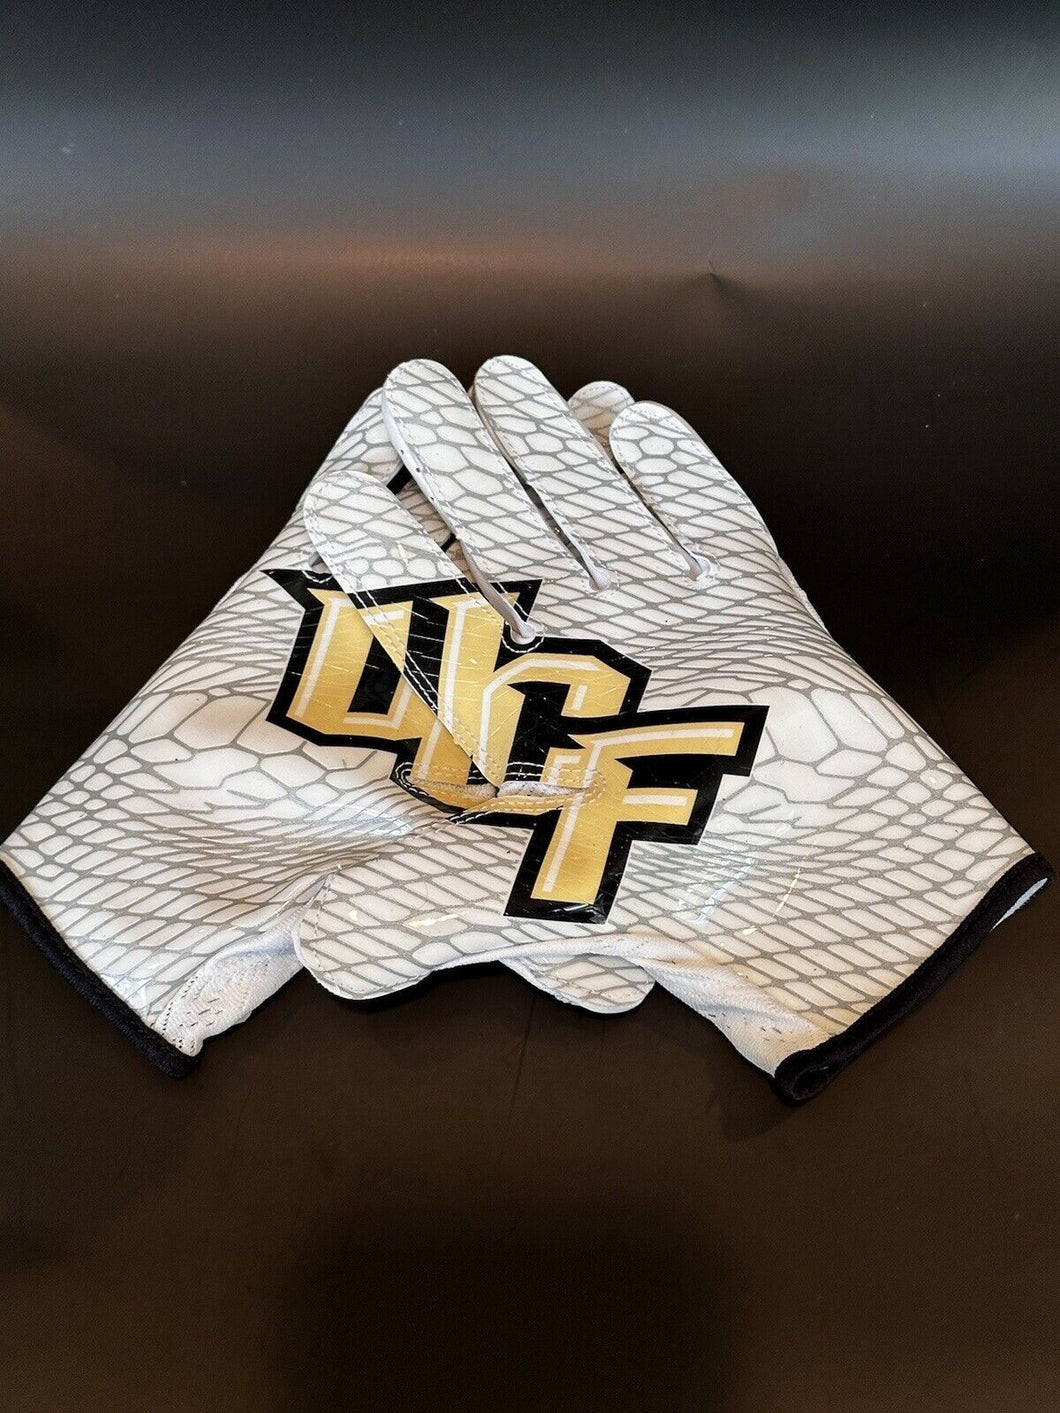 UCF Knights Game Issued / Worn Nike Vapor Knit Football Gloves - Size Medium